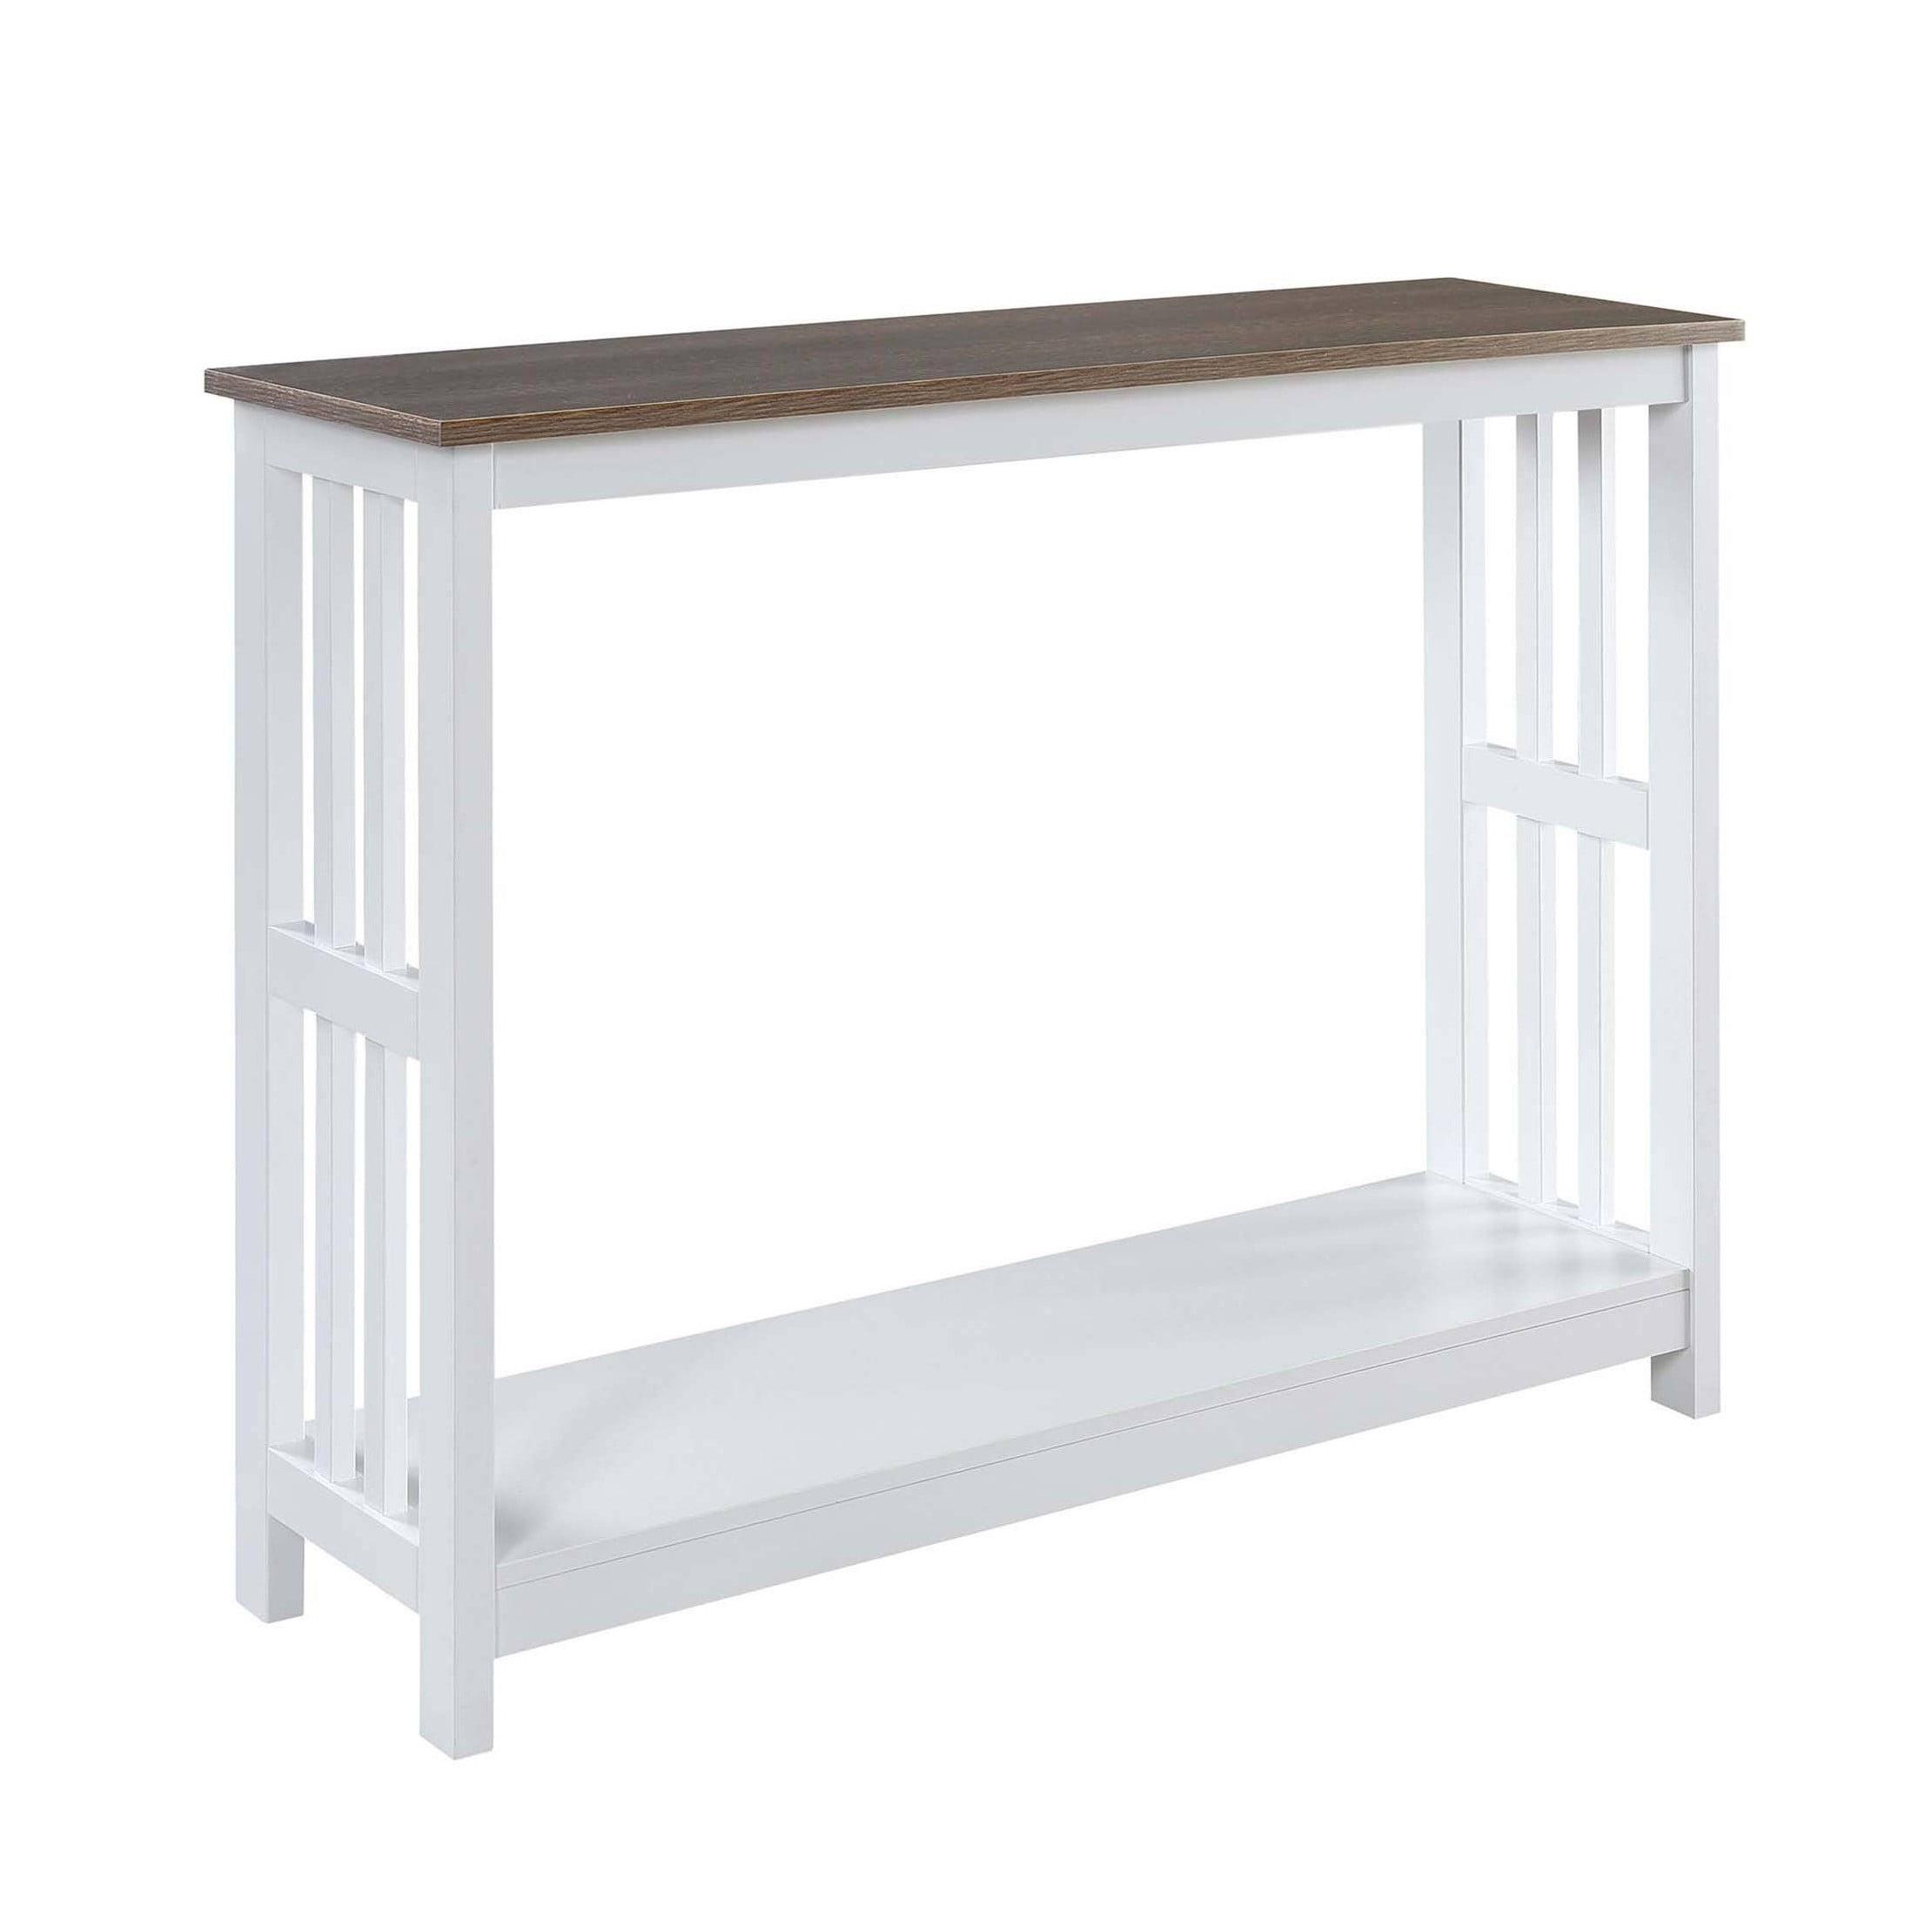 Driftwood and White Mission Console Table with Storage Shelf